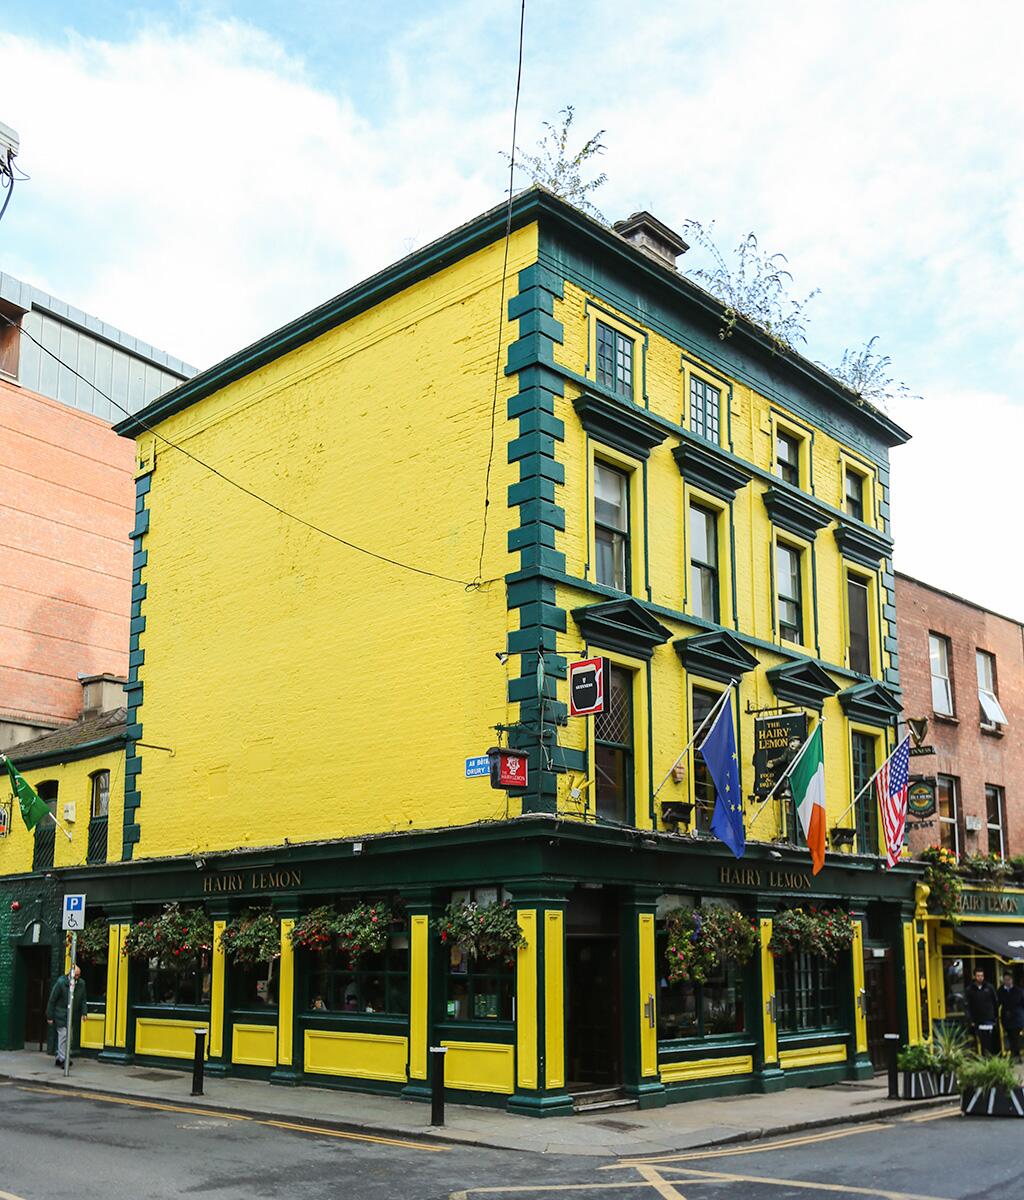 <a href='https://www.fodors.com/world/europe/ireland/dublin/experiences/news/photos/where-to-find-the-best-pubs-in-dublin#'>From &quot;The Best Pubs in Dublin, According to Locals: The Hairy Lemon &quot;</a>